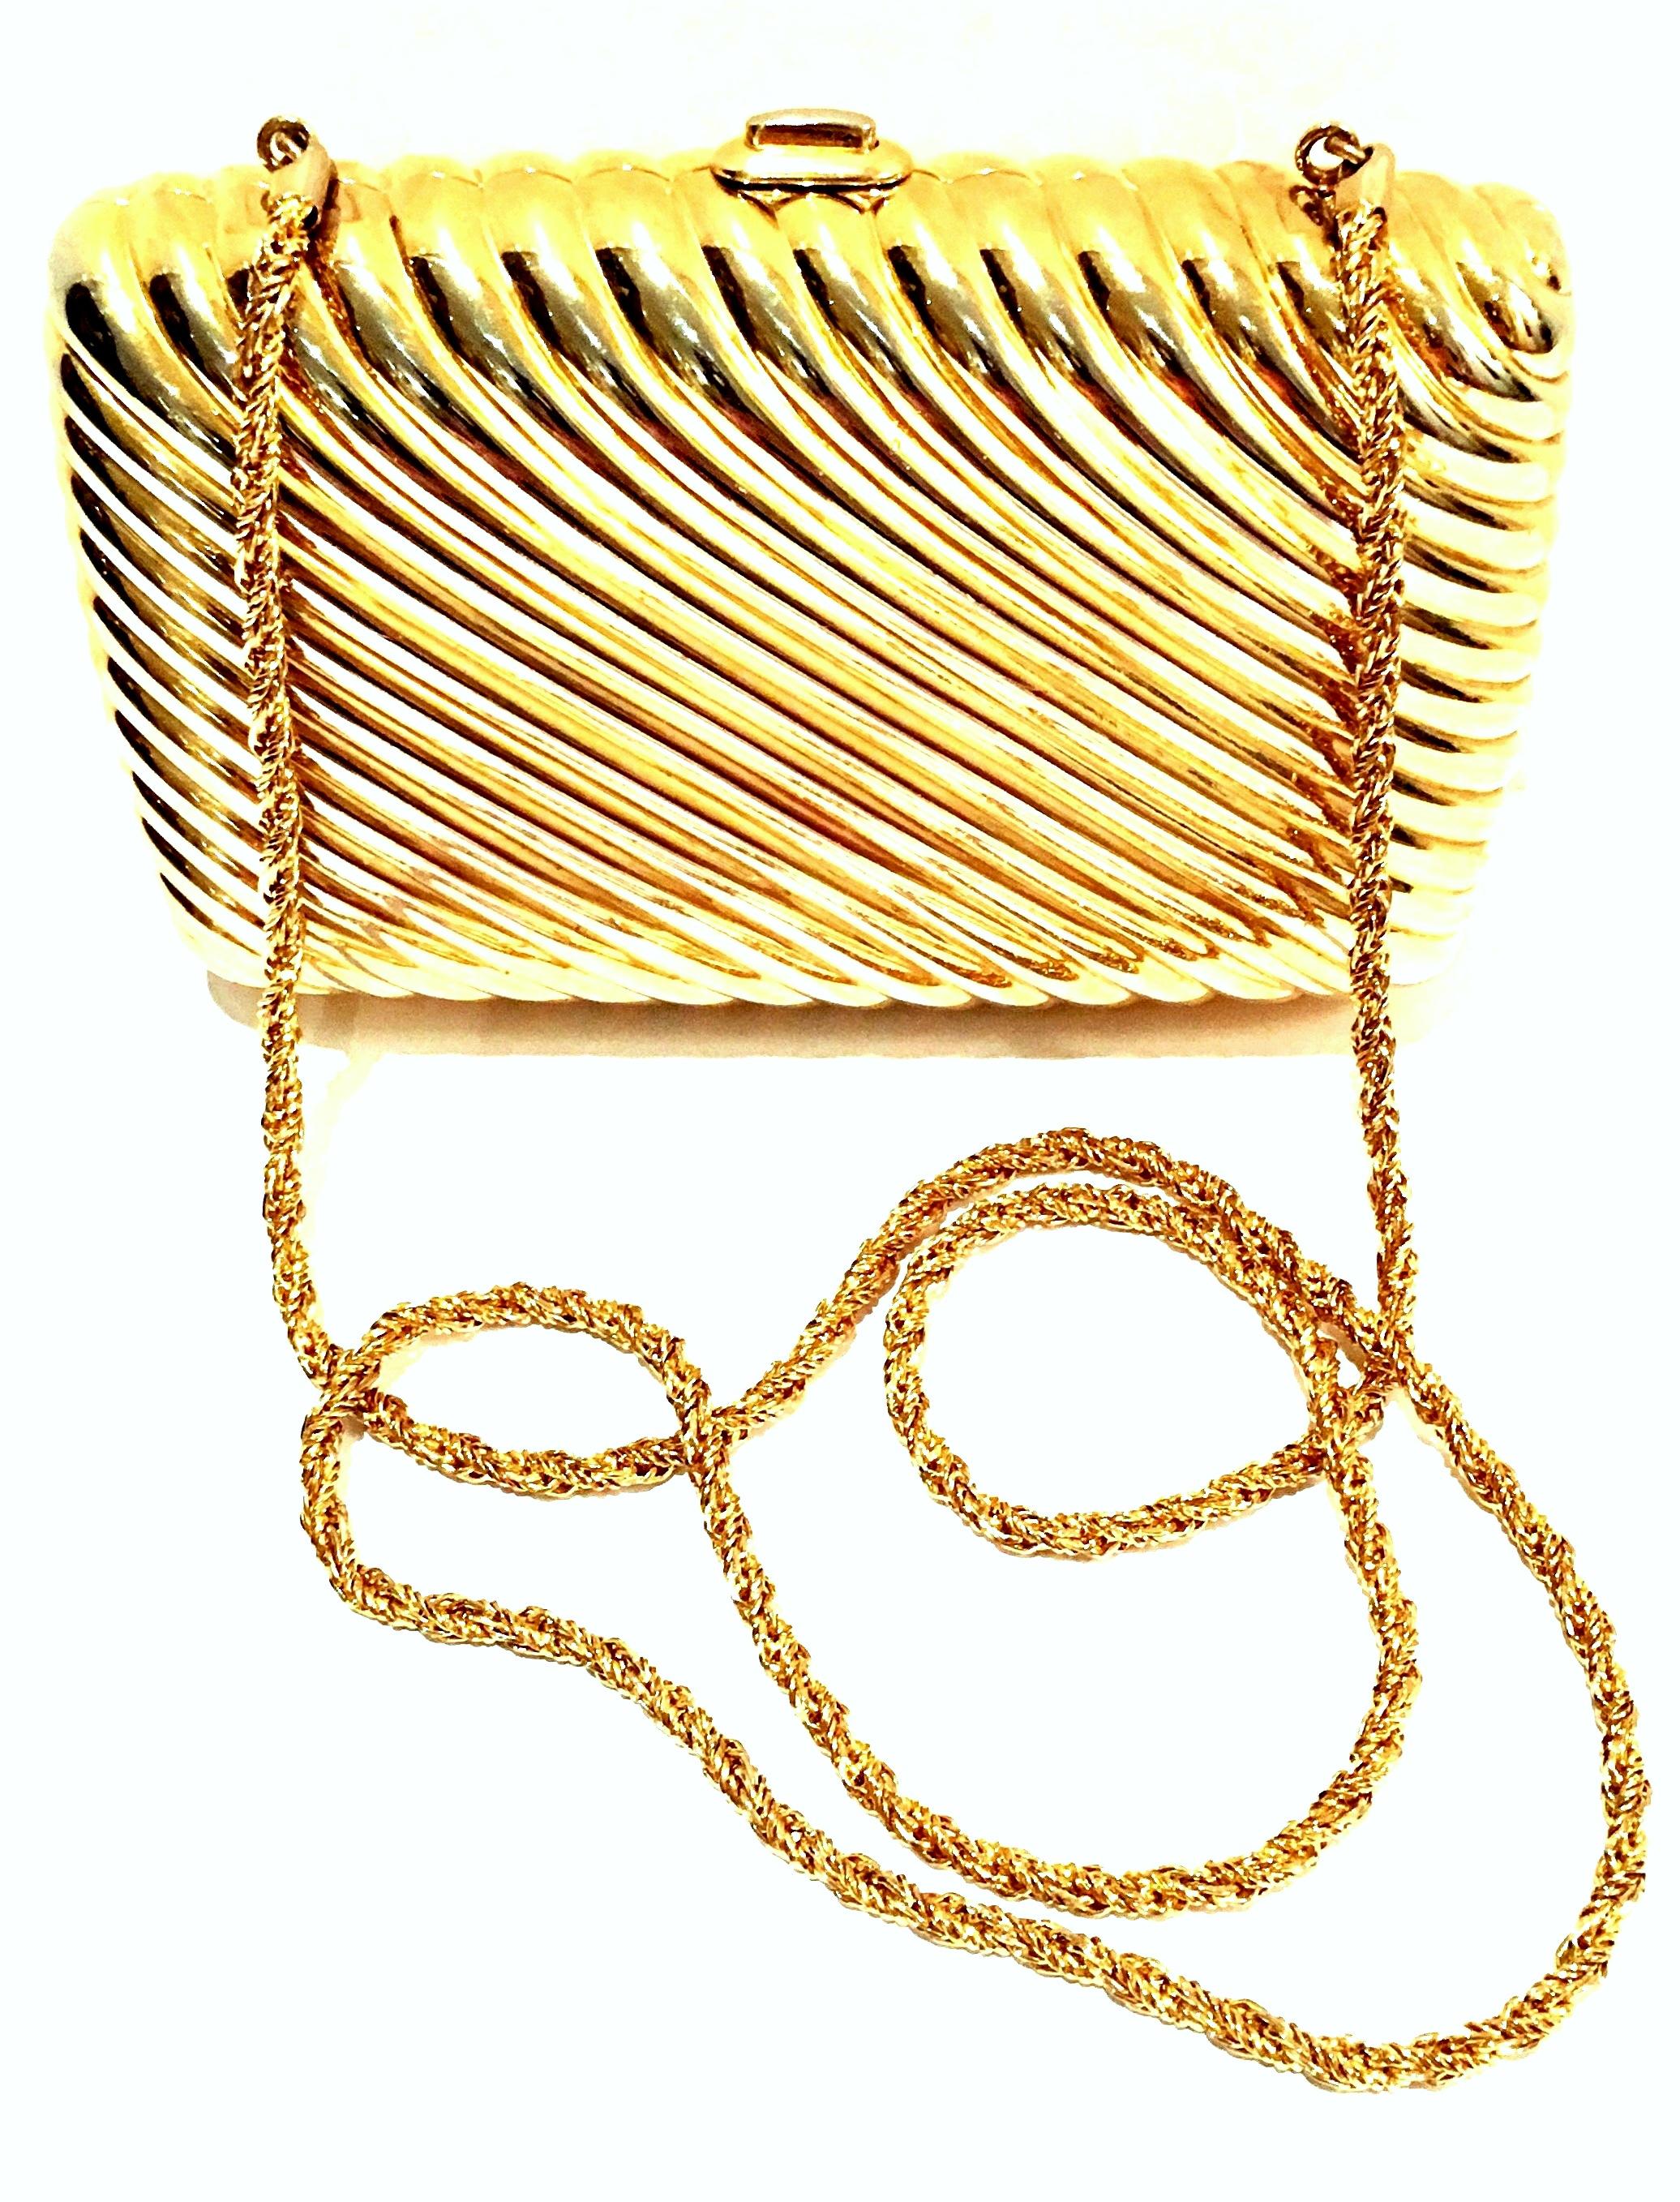 20th Century Gold Gilt Ribbed minaudiere box clutch evening bag by, Judith Leiber. This Classic & Timeless Judith Leiber gold plated metal hard case ribbed minaudière evening bag can be used as a clutch or shoulder bag. Features a simple gold snap